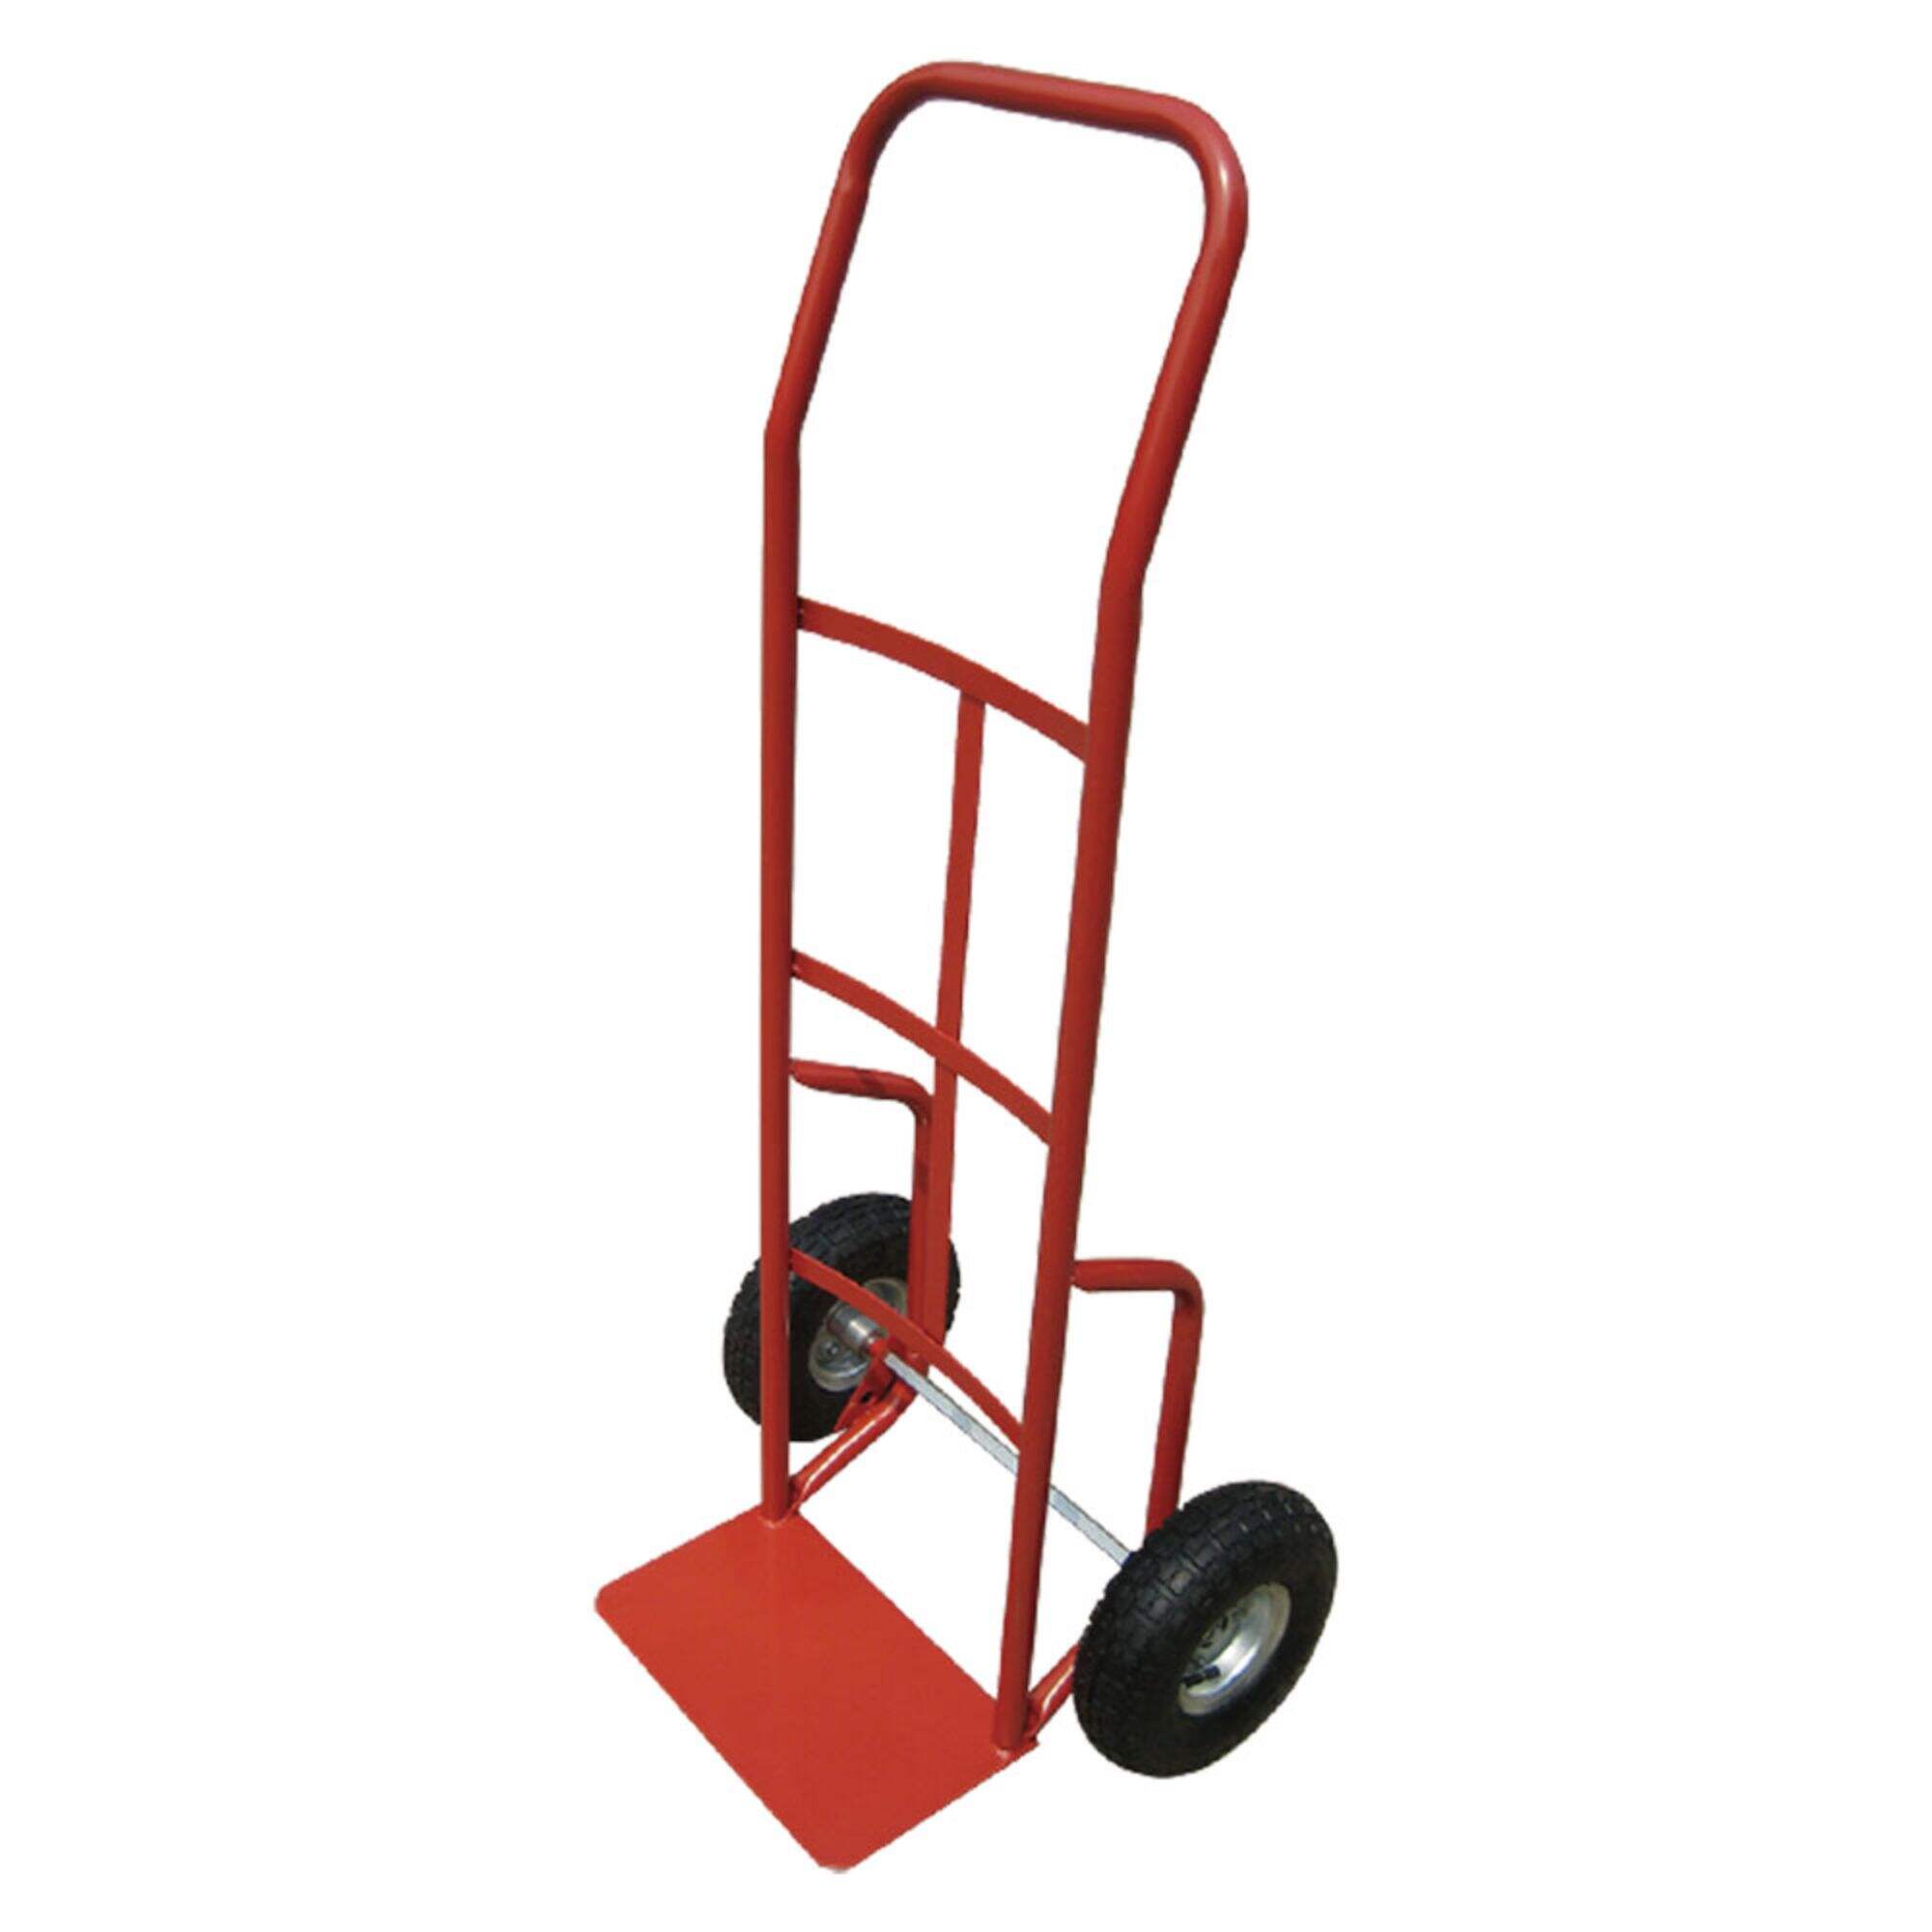 HT1546 Steel Hand Truck, Hand Cart Trolley Dolly, with 8x1.75 inch Pneumatic Wheel